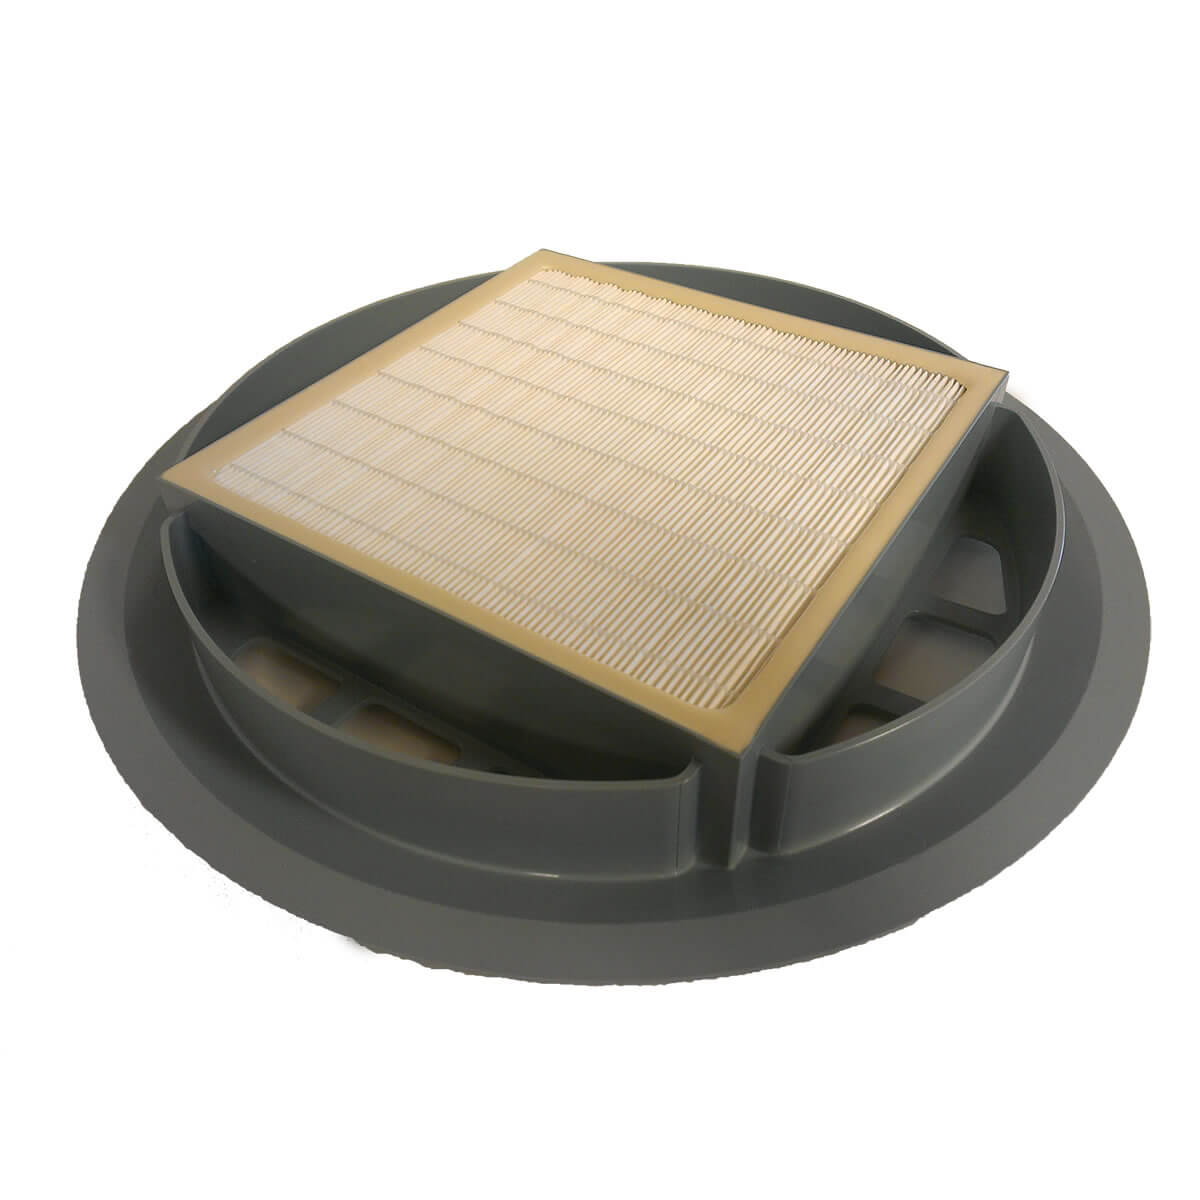 HEPA Filter Replacement Cartridge for the GD930